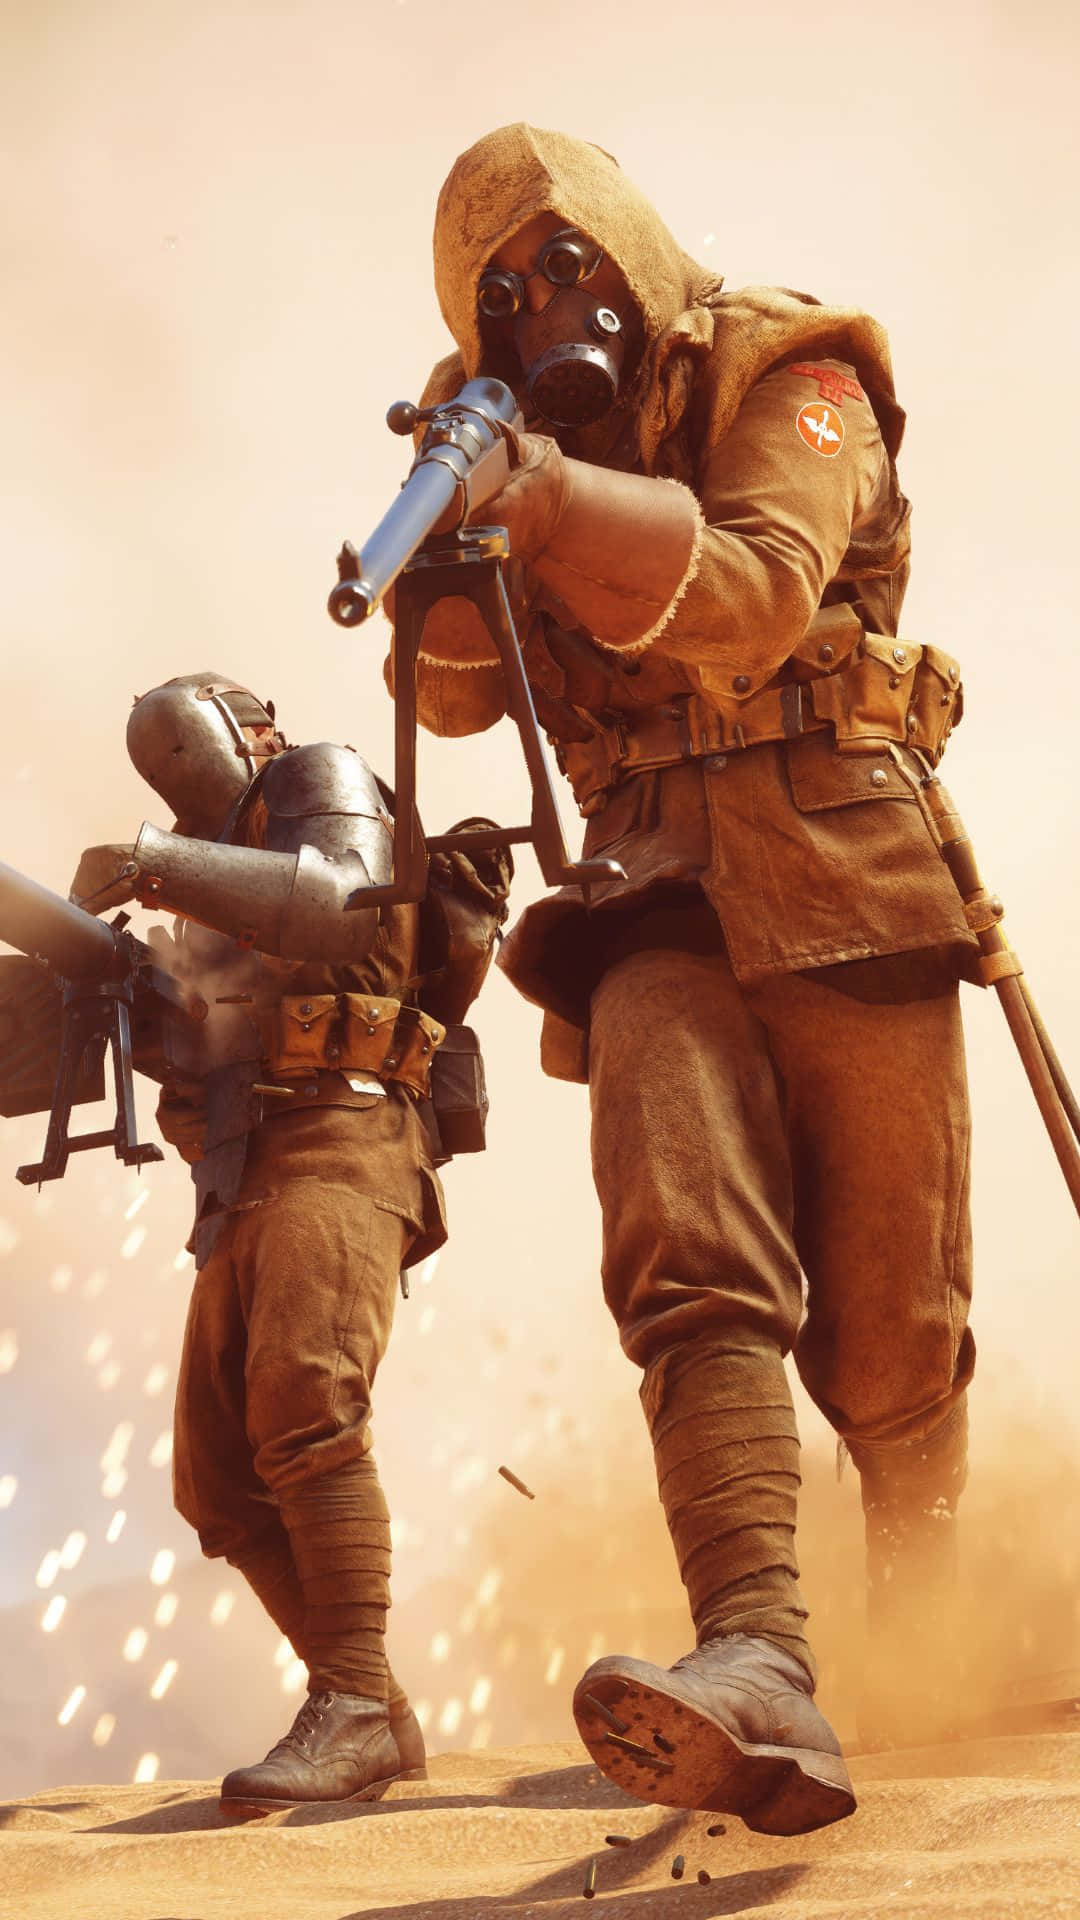 Android Battlefield 1 Background Two Masked Soldiers